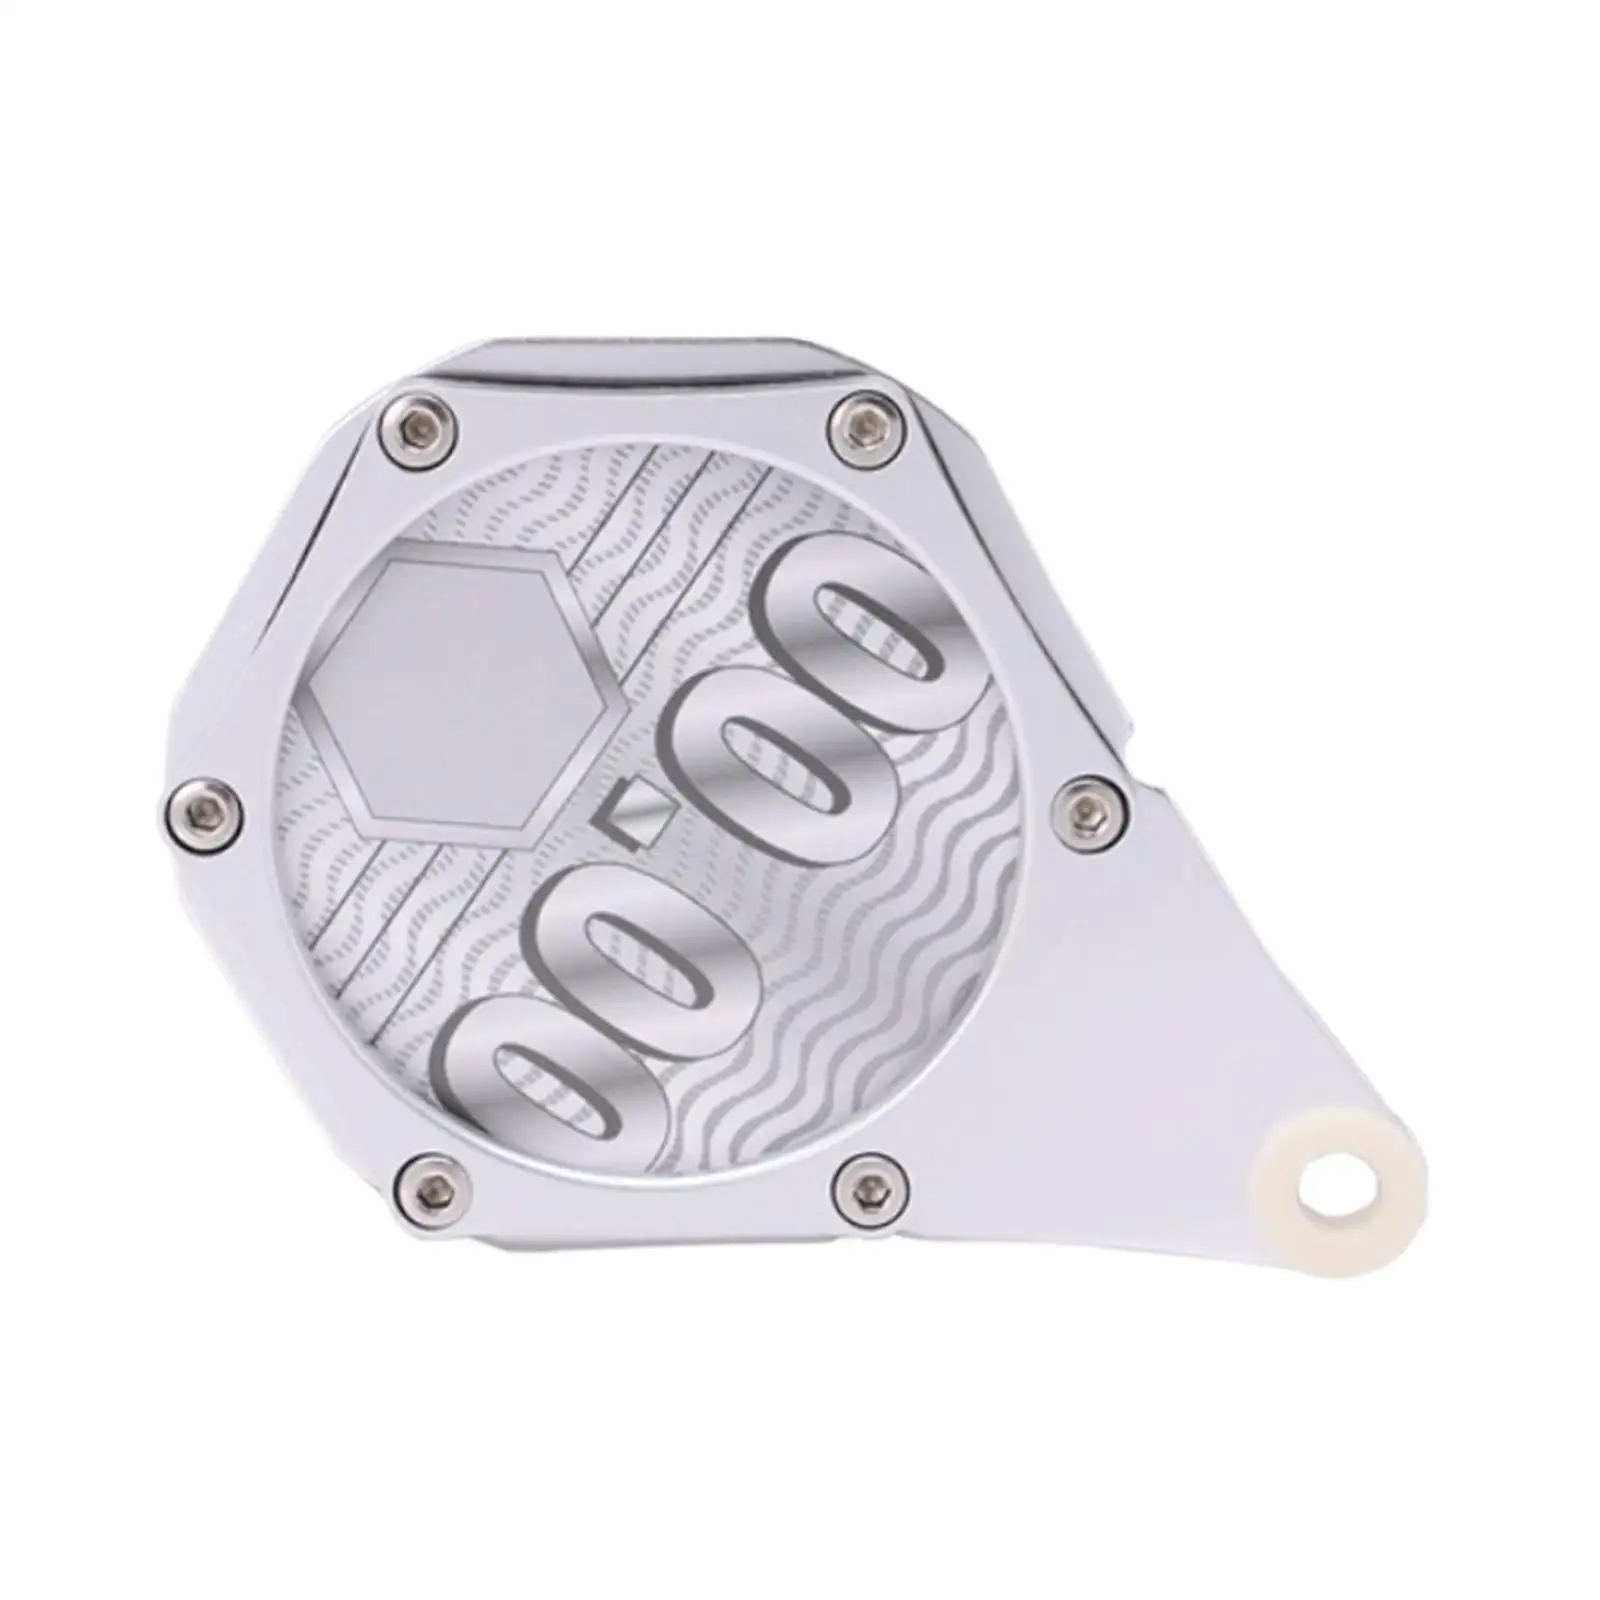 Hexagon Tax Disc Plate Motorbike Tax Disc Holder for Scooter Motor